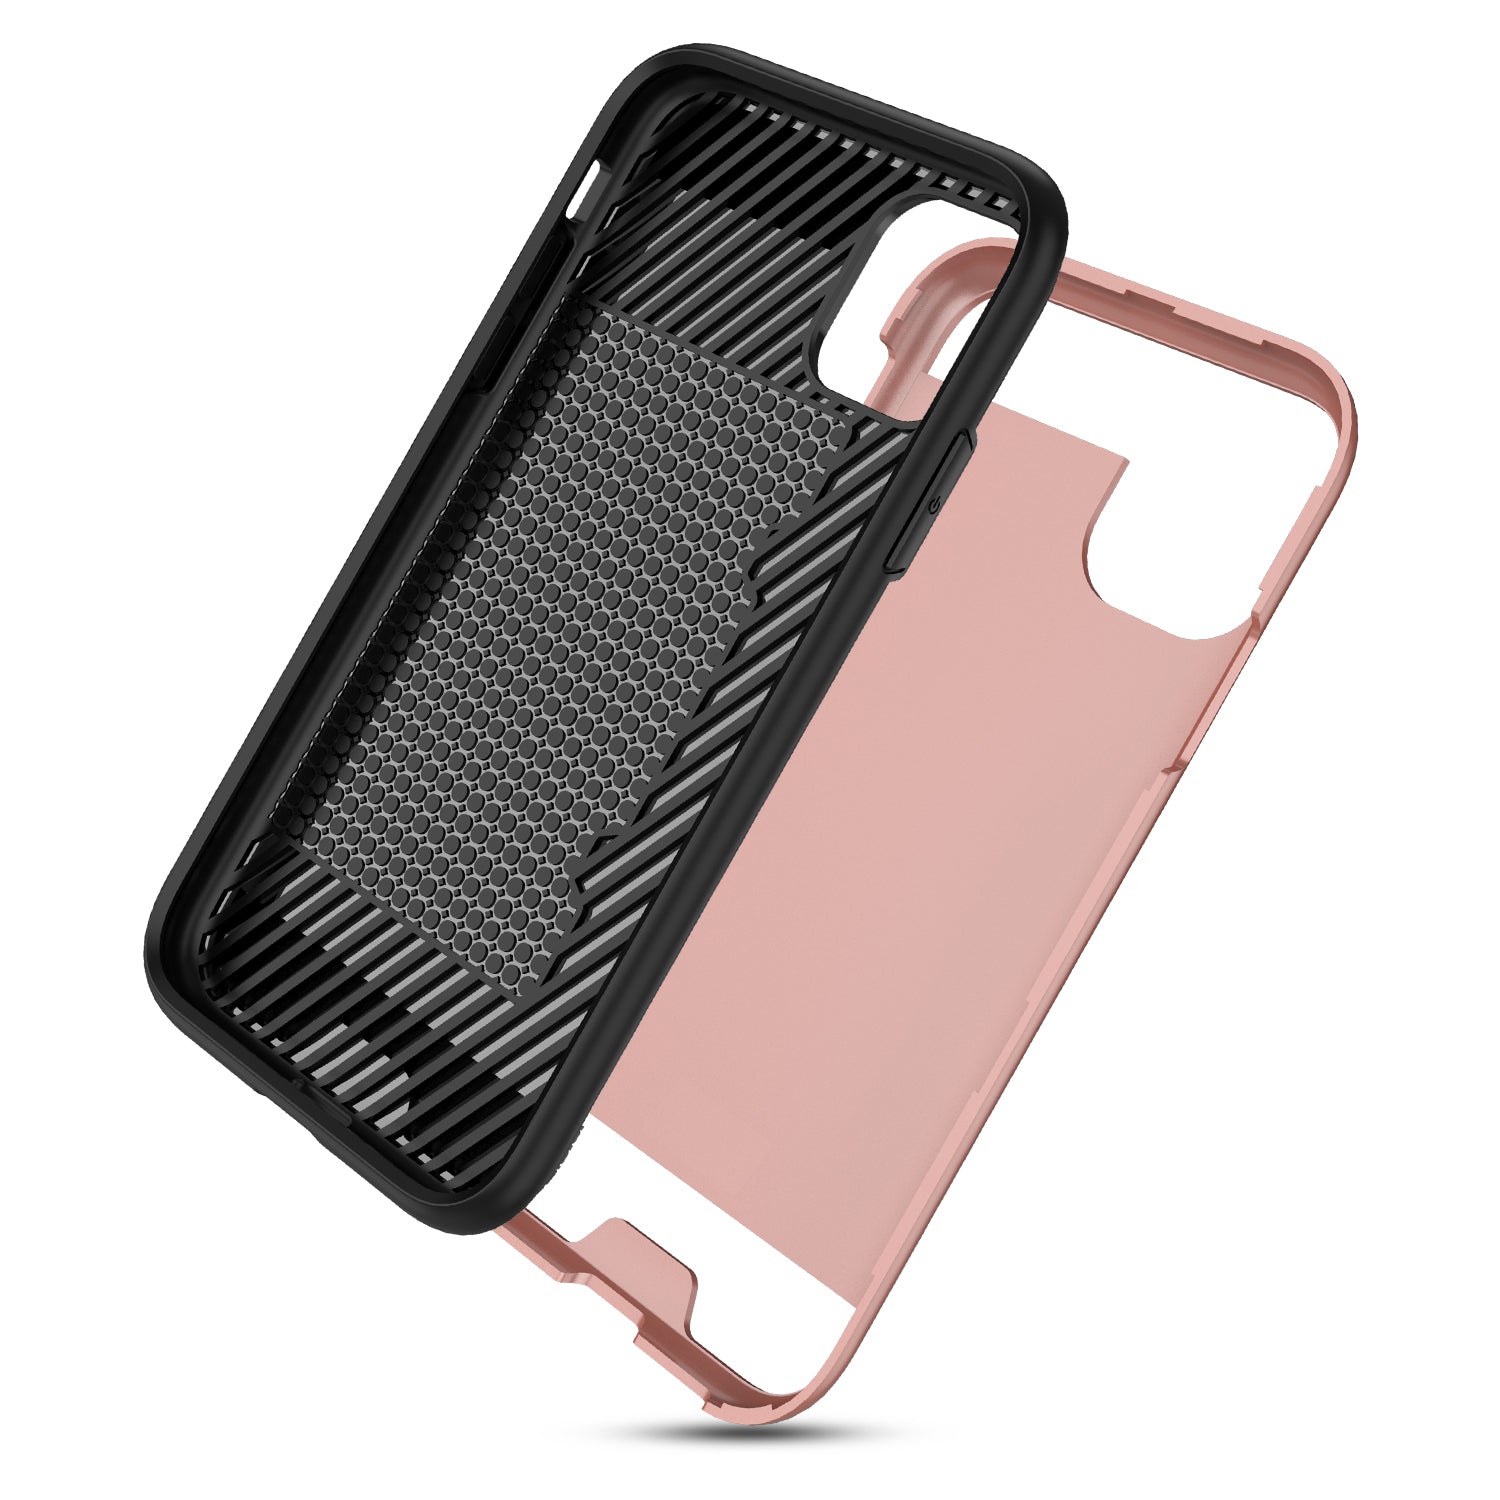 Case Hybrid Slim Armor With Card Holder iPhone 11 Pro Max Rose Gold Color